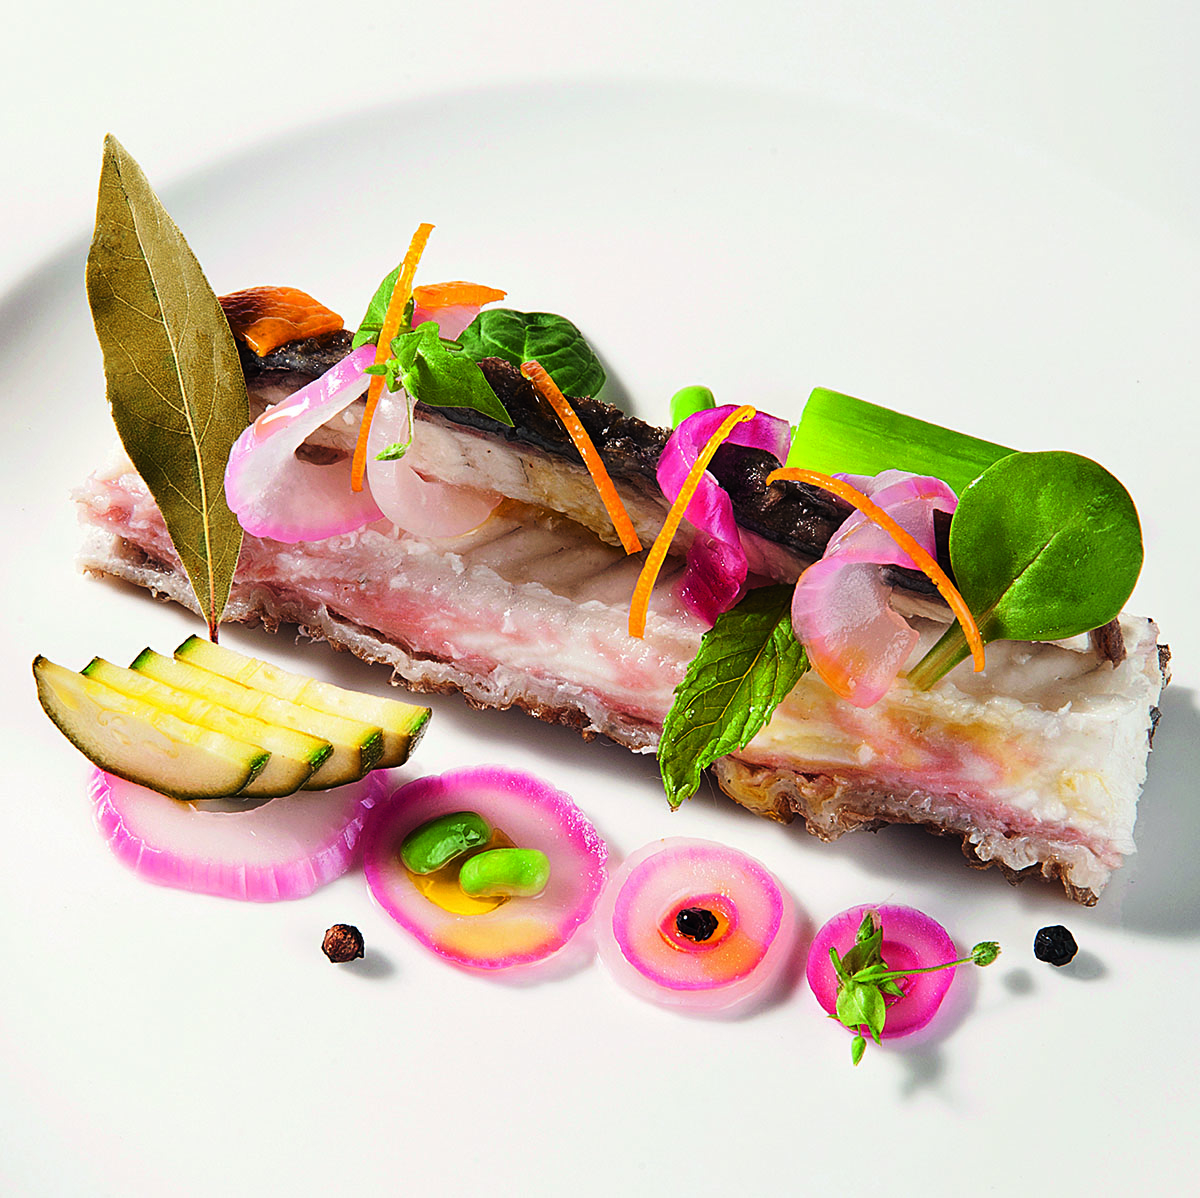 Marinated eel with red onions from Tropea